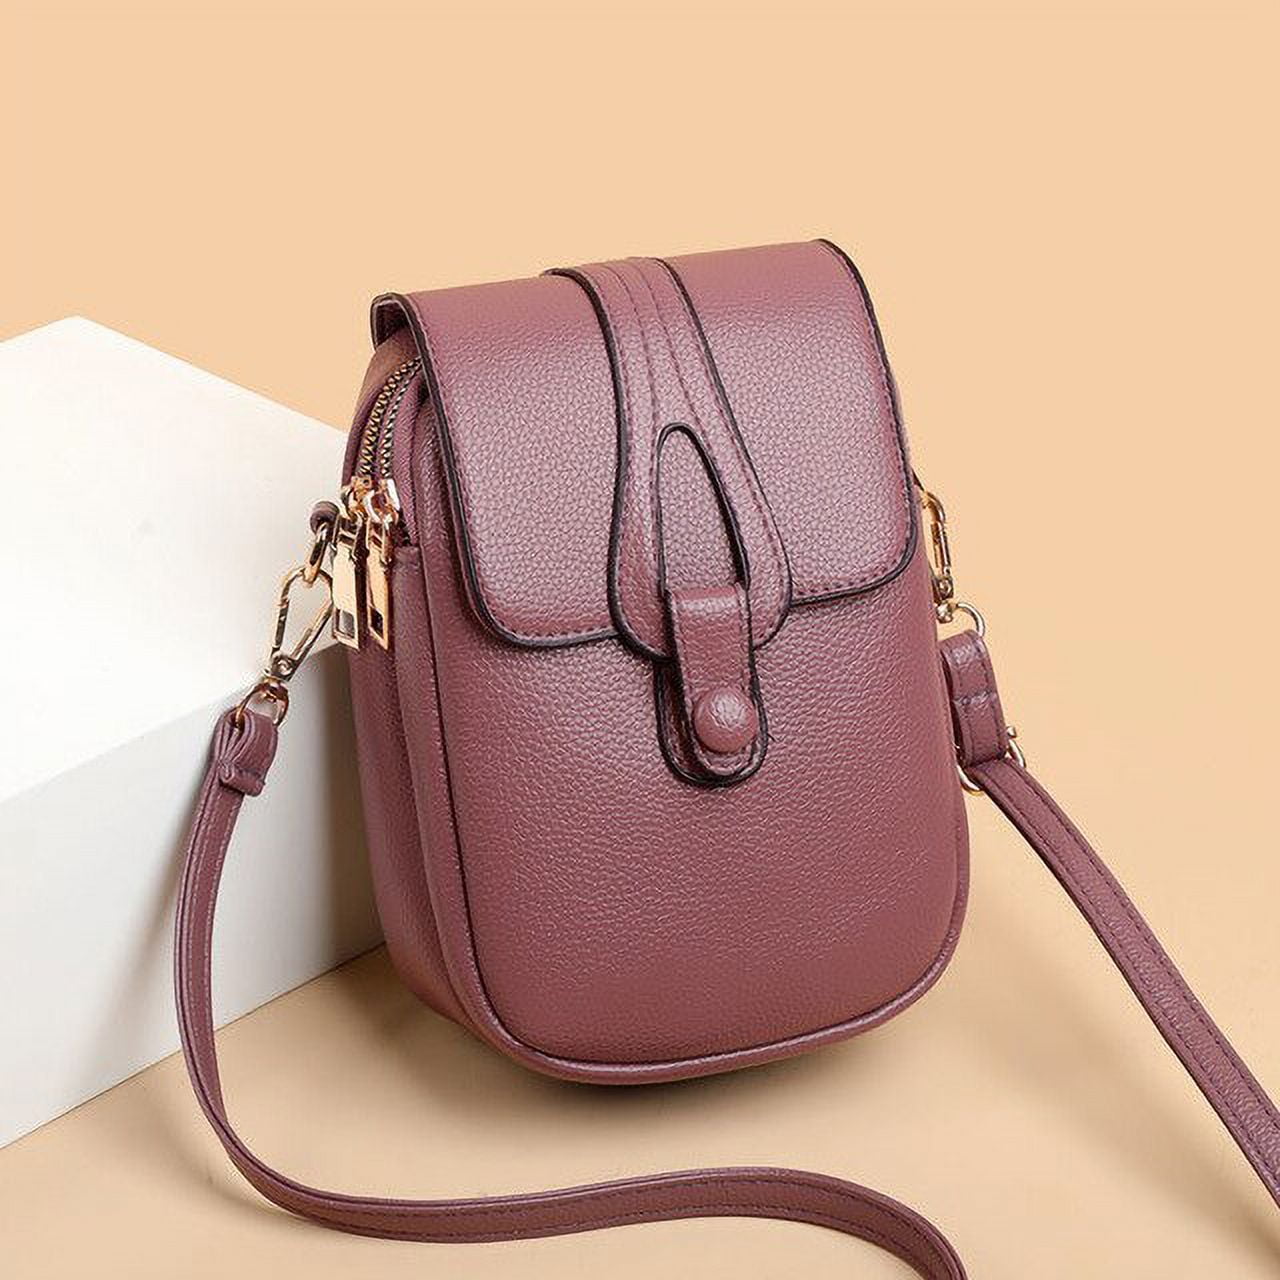 CoCopeaunts Vintage Simple Small PU Leather Crossbody Bag for